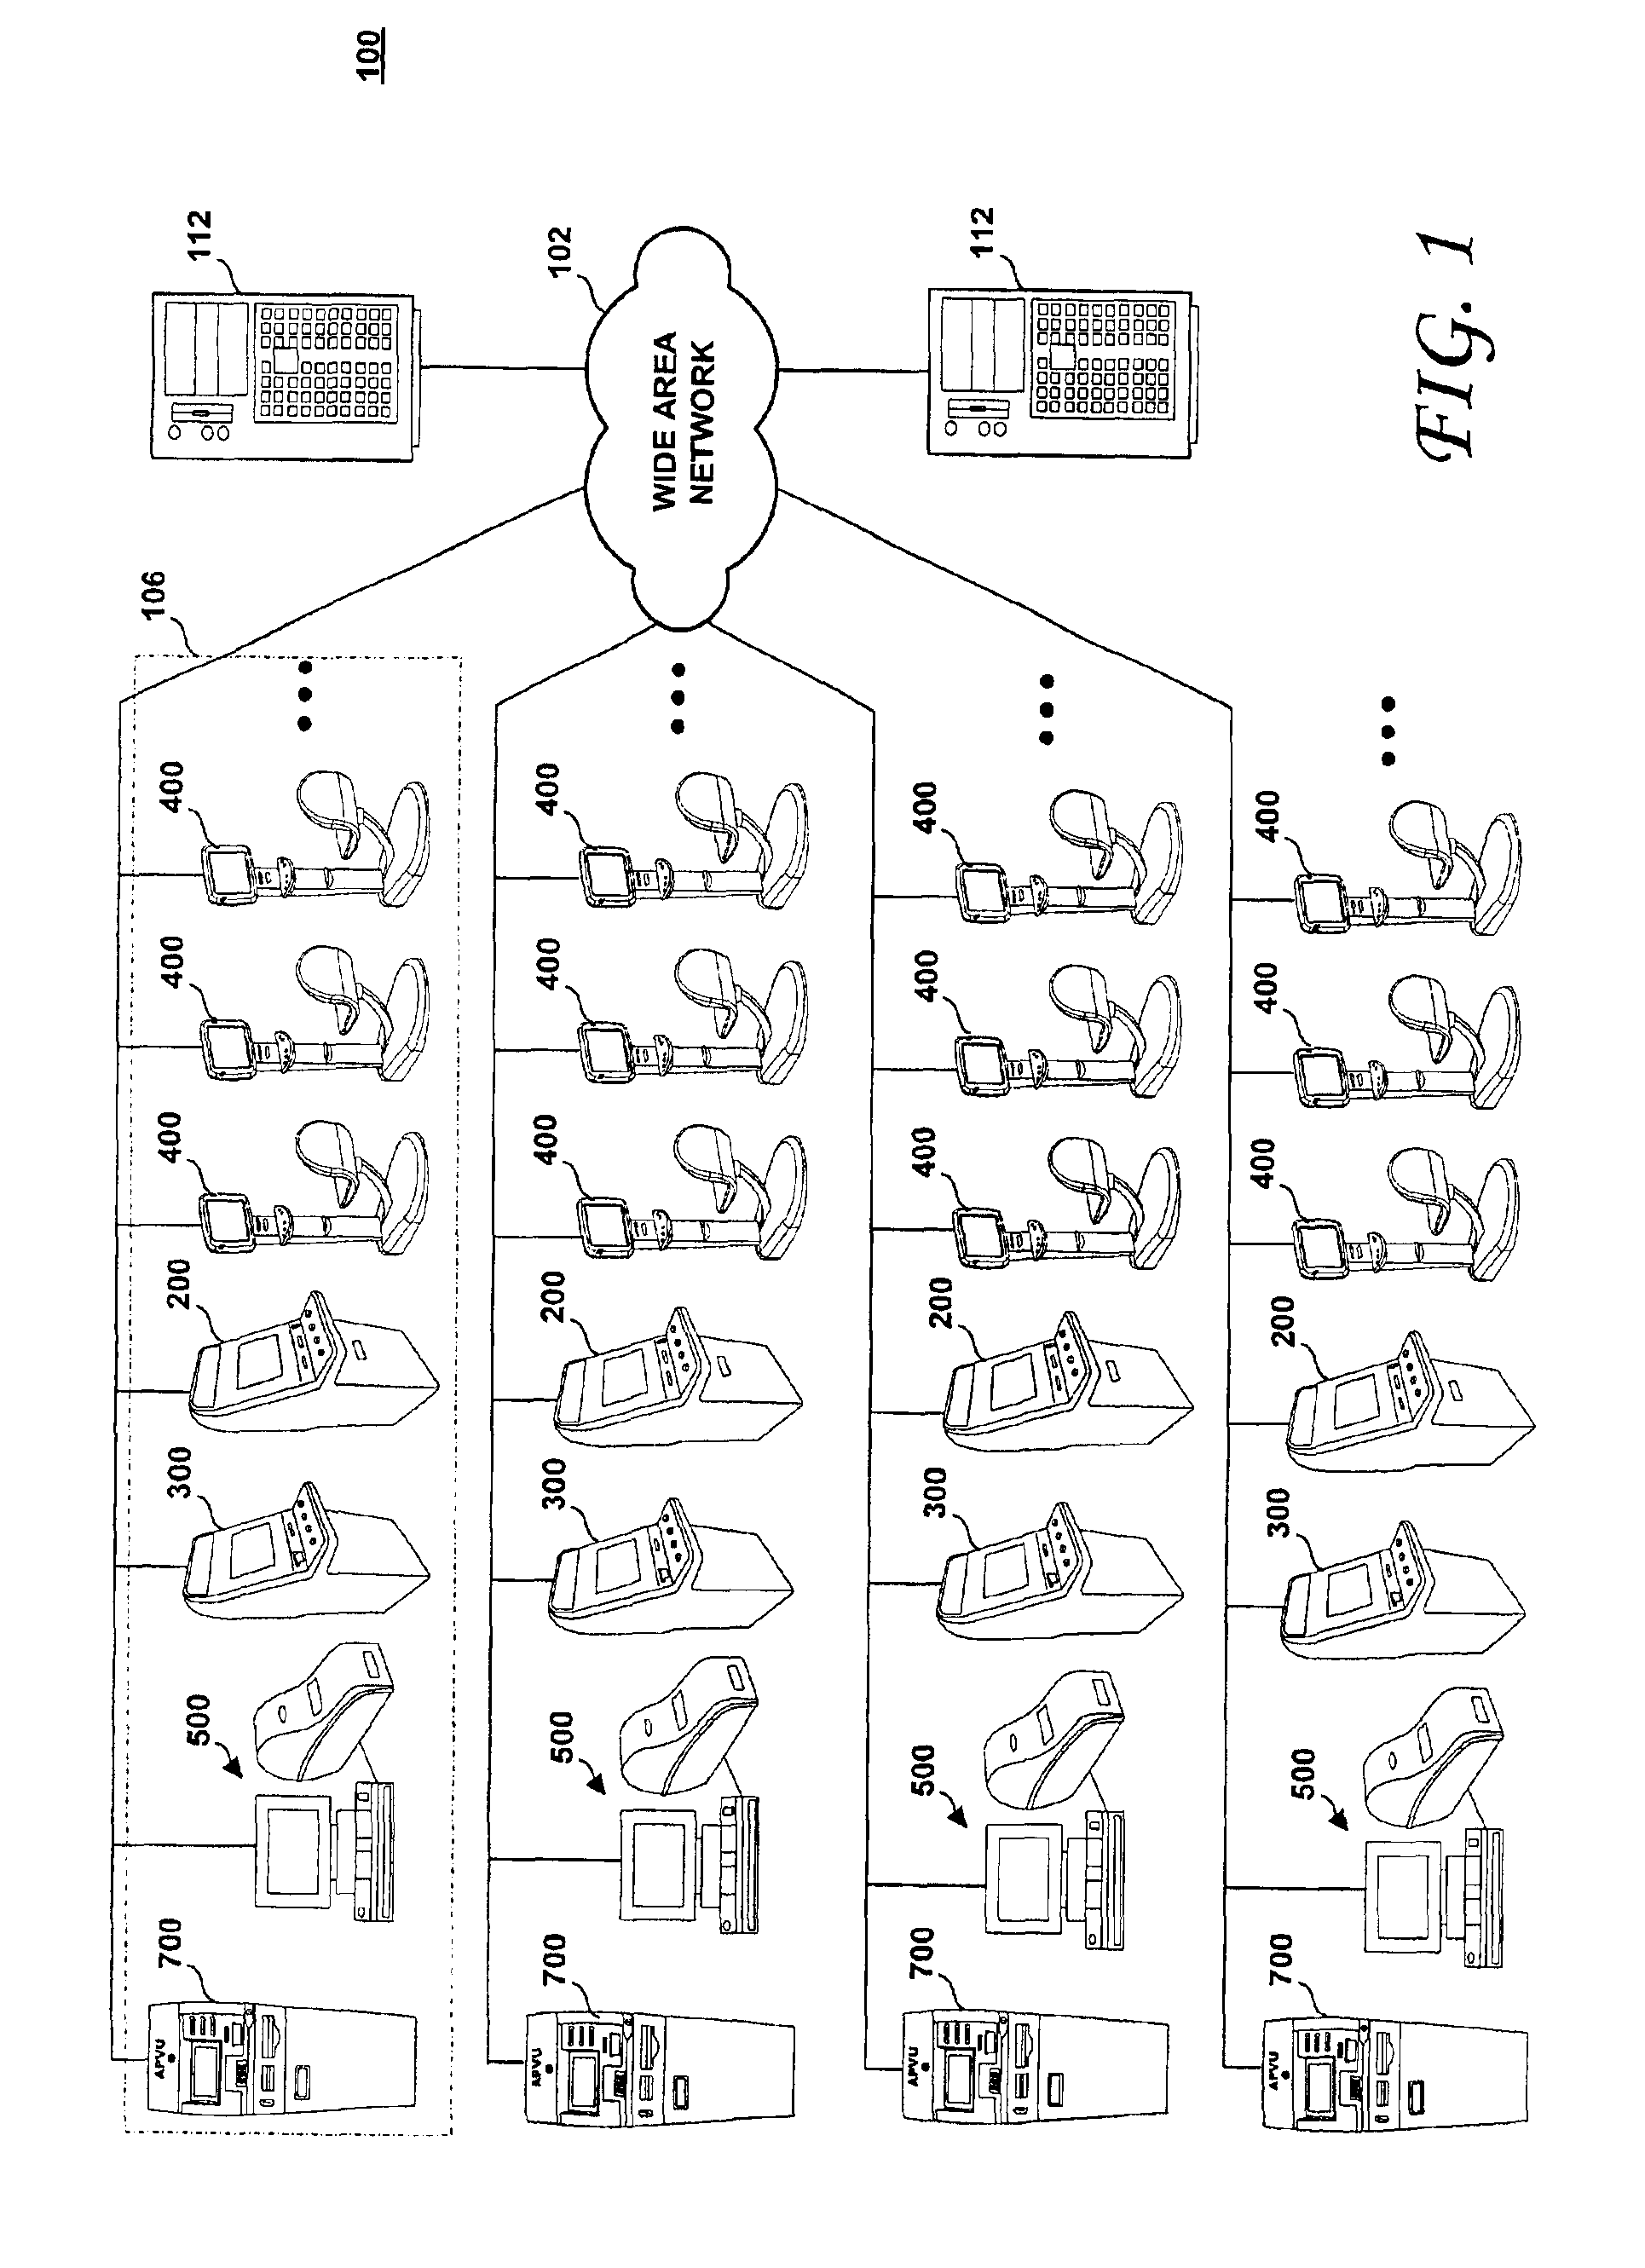 Modular entertainment and gaming system configured for processing raw biometric data and multimedia response by a remote server